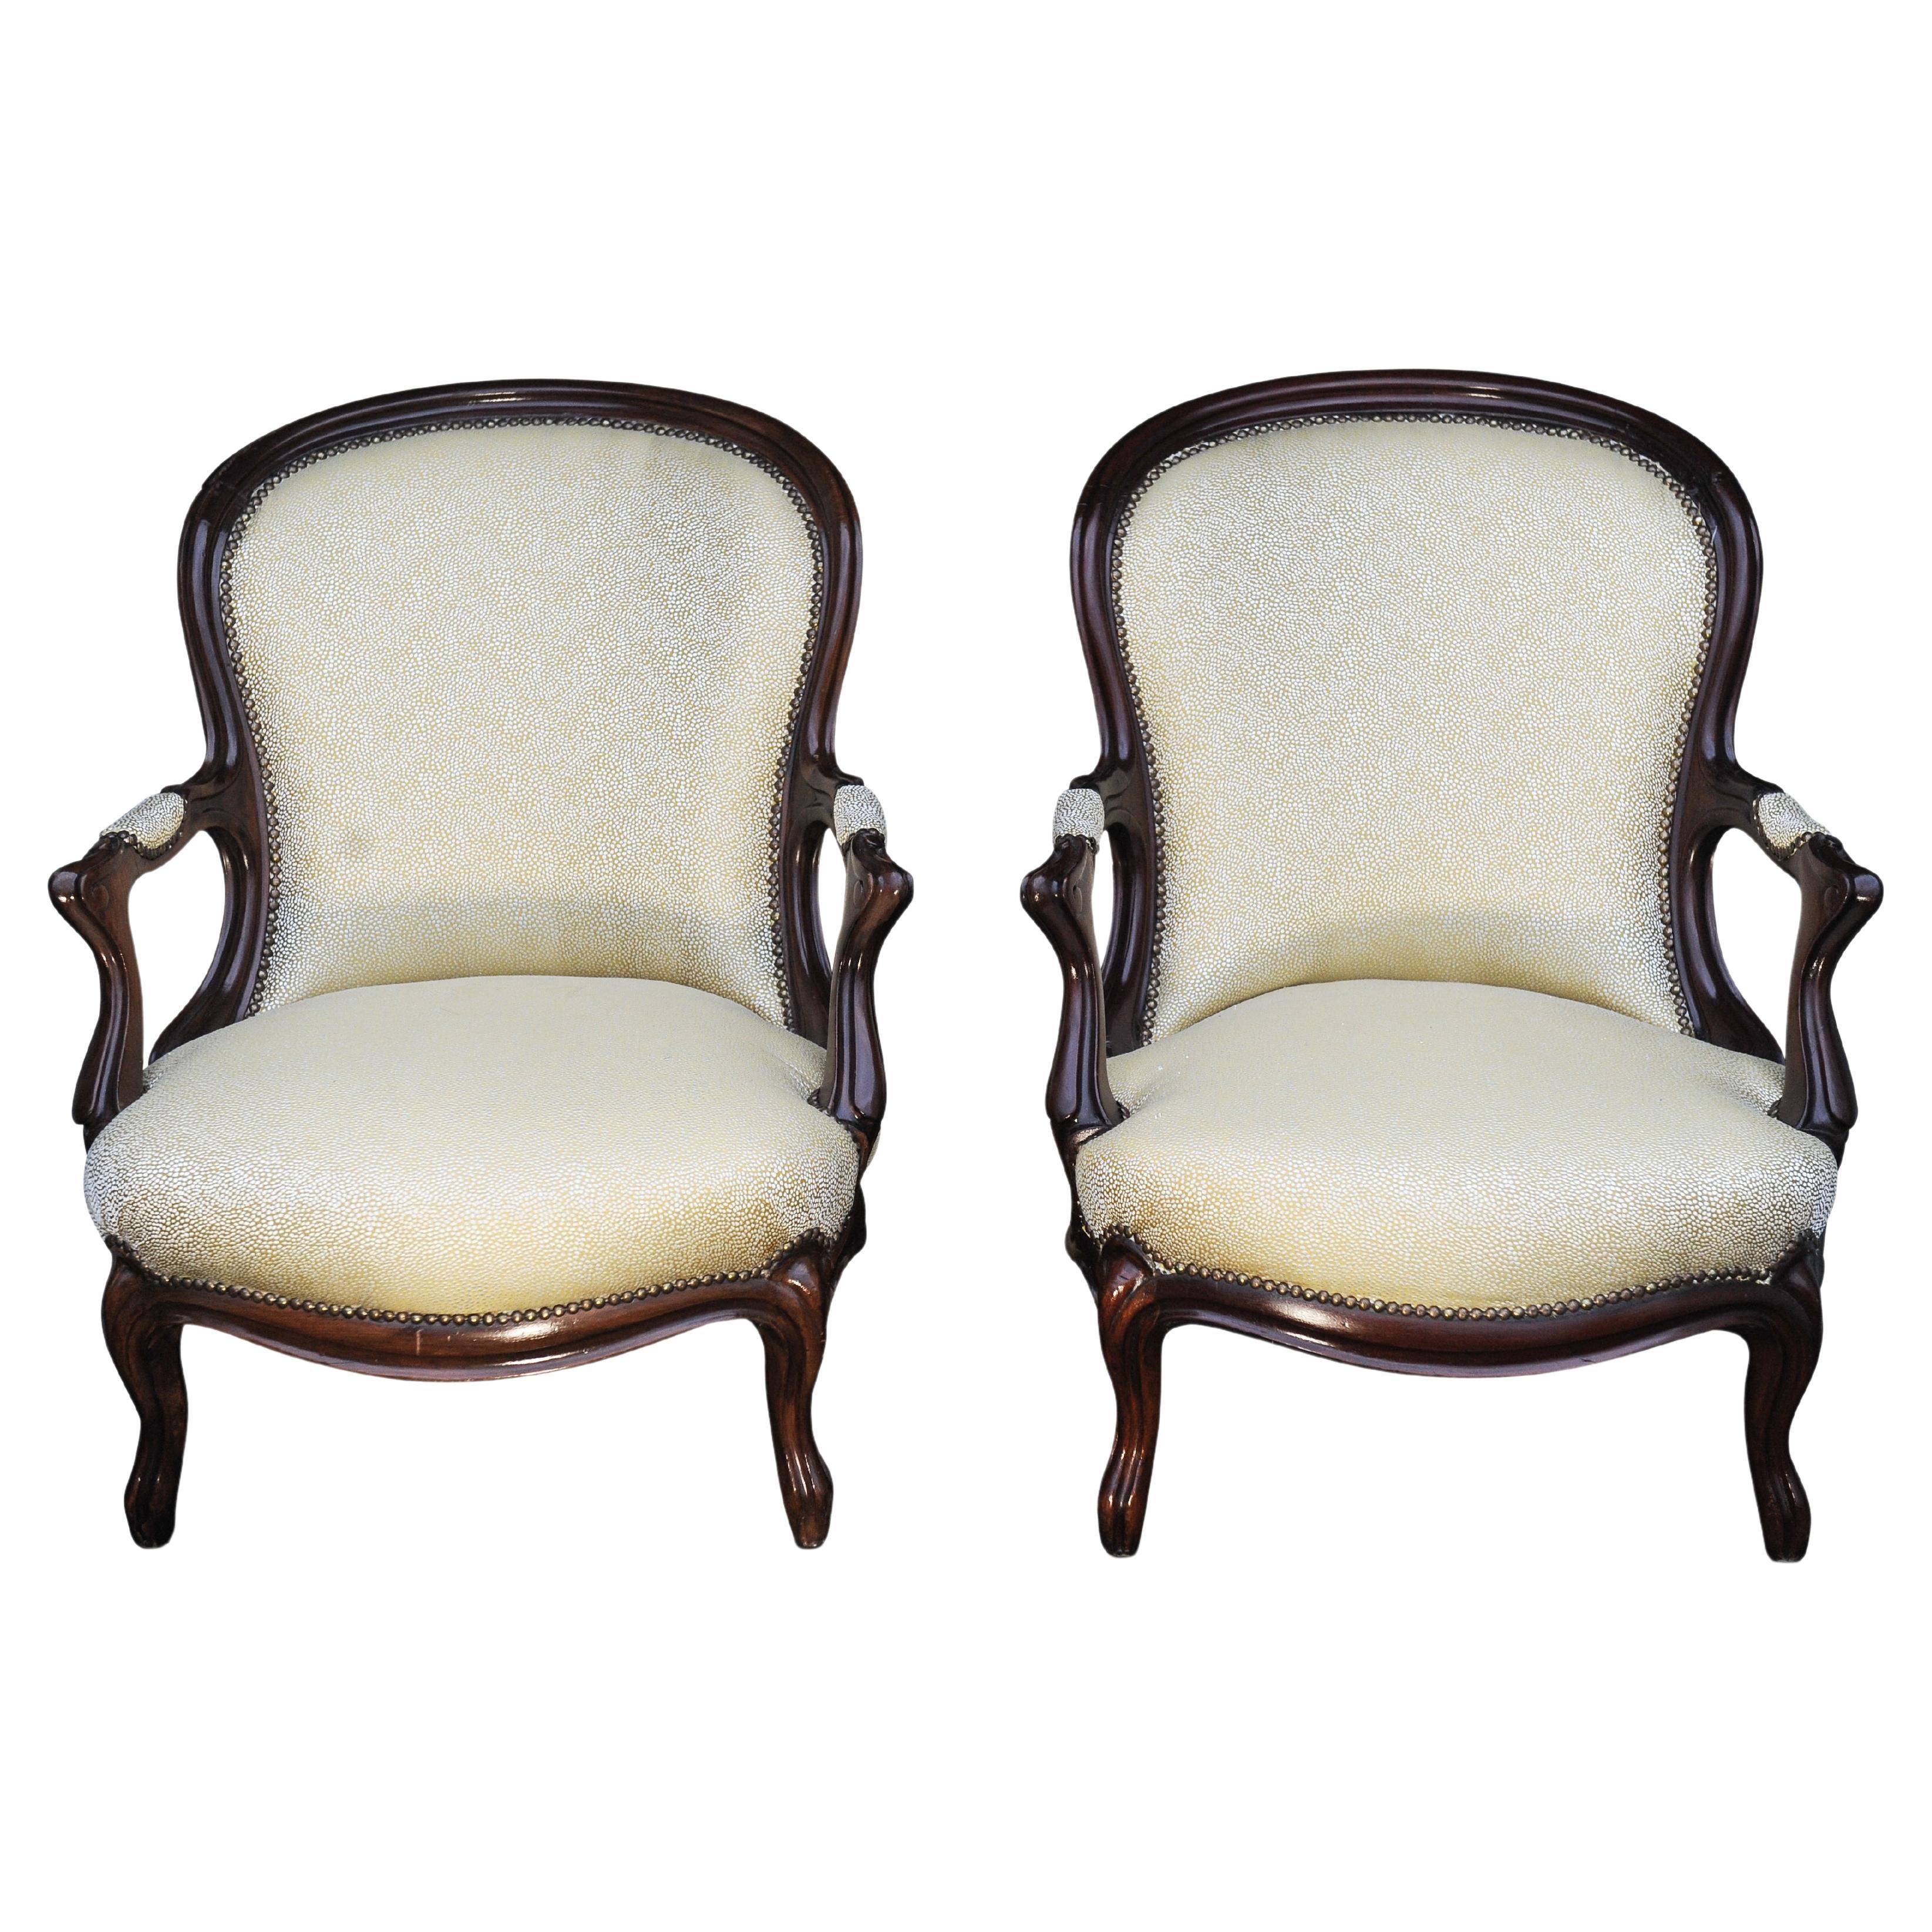 English Classic Pair of Victorian Shagreen Upholstered Mahogany Framed Open Armchairs For Sale